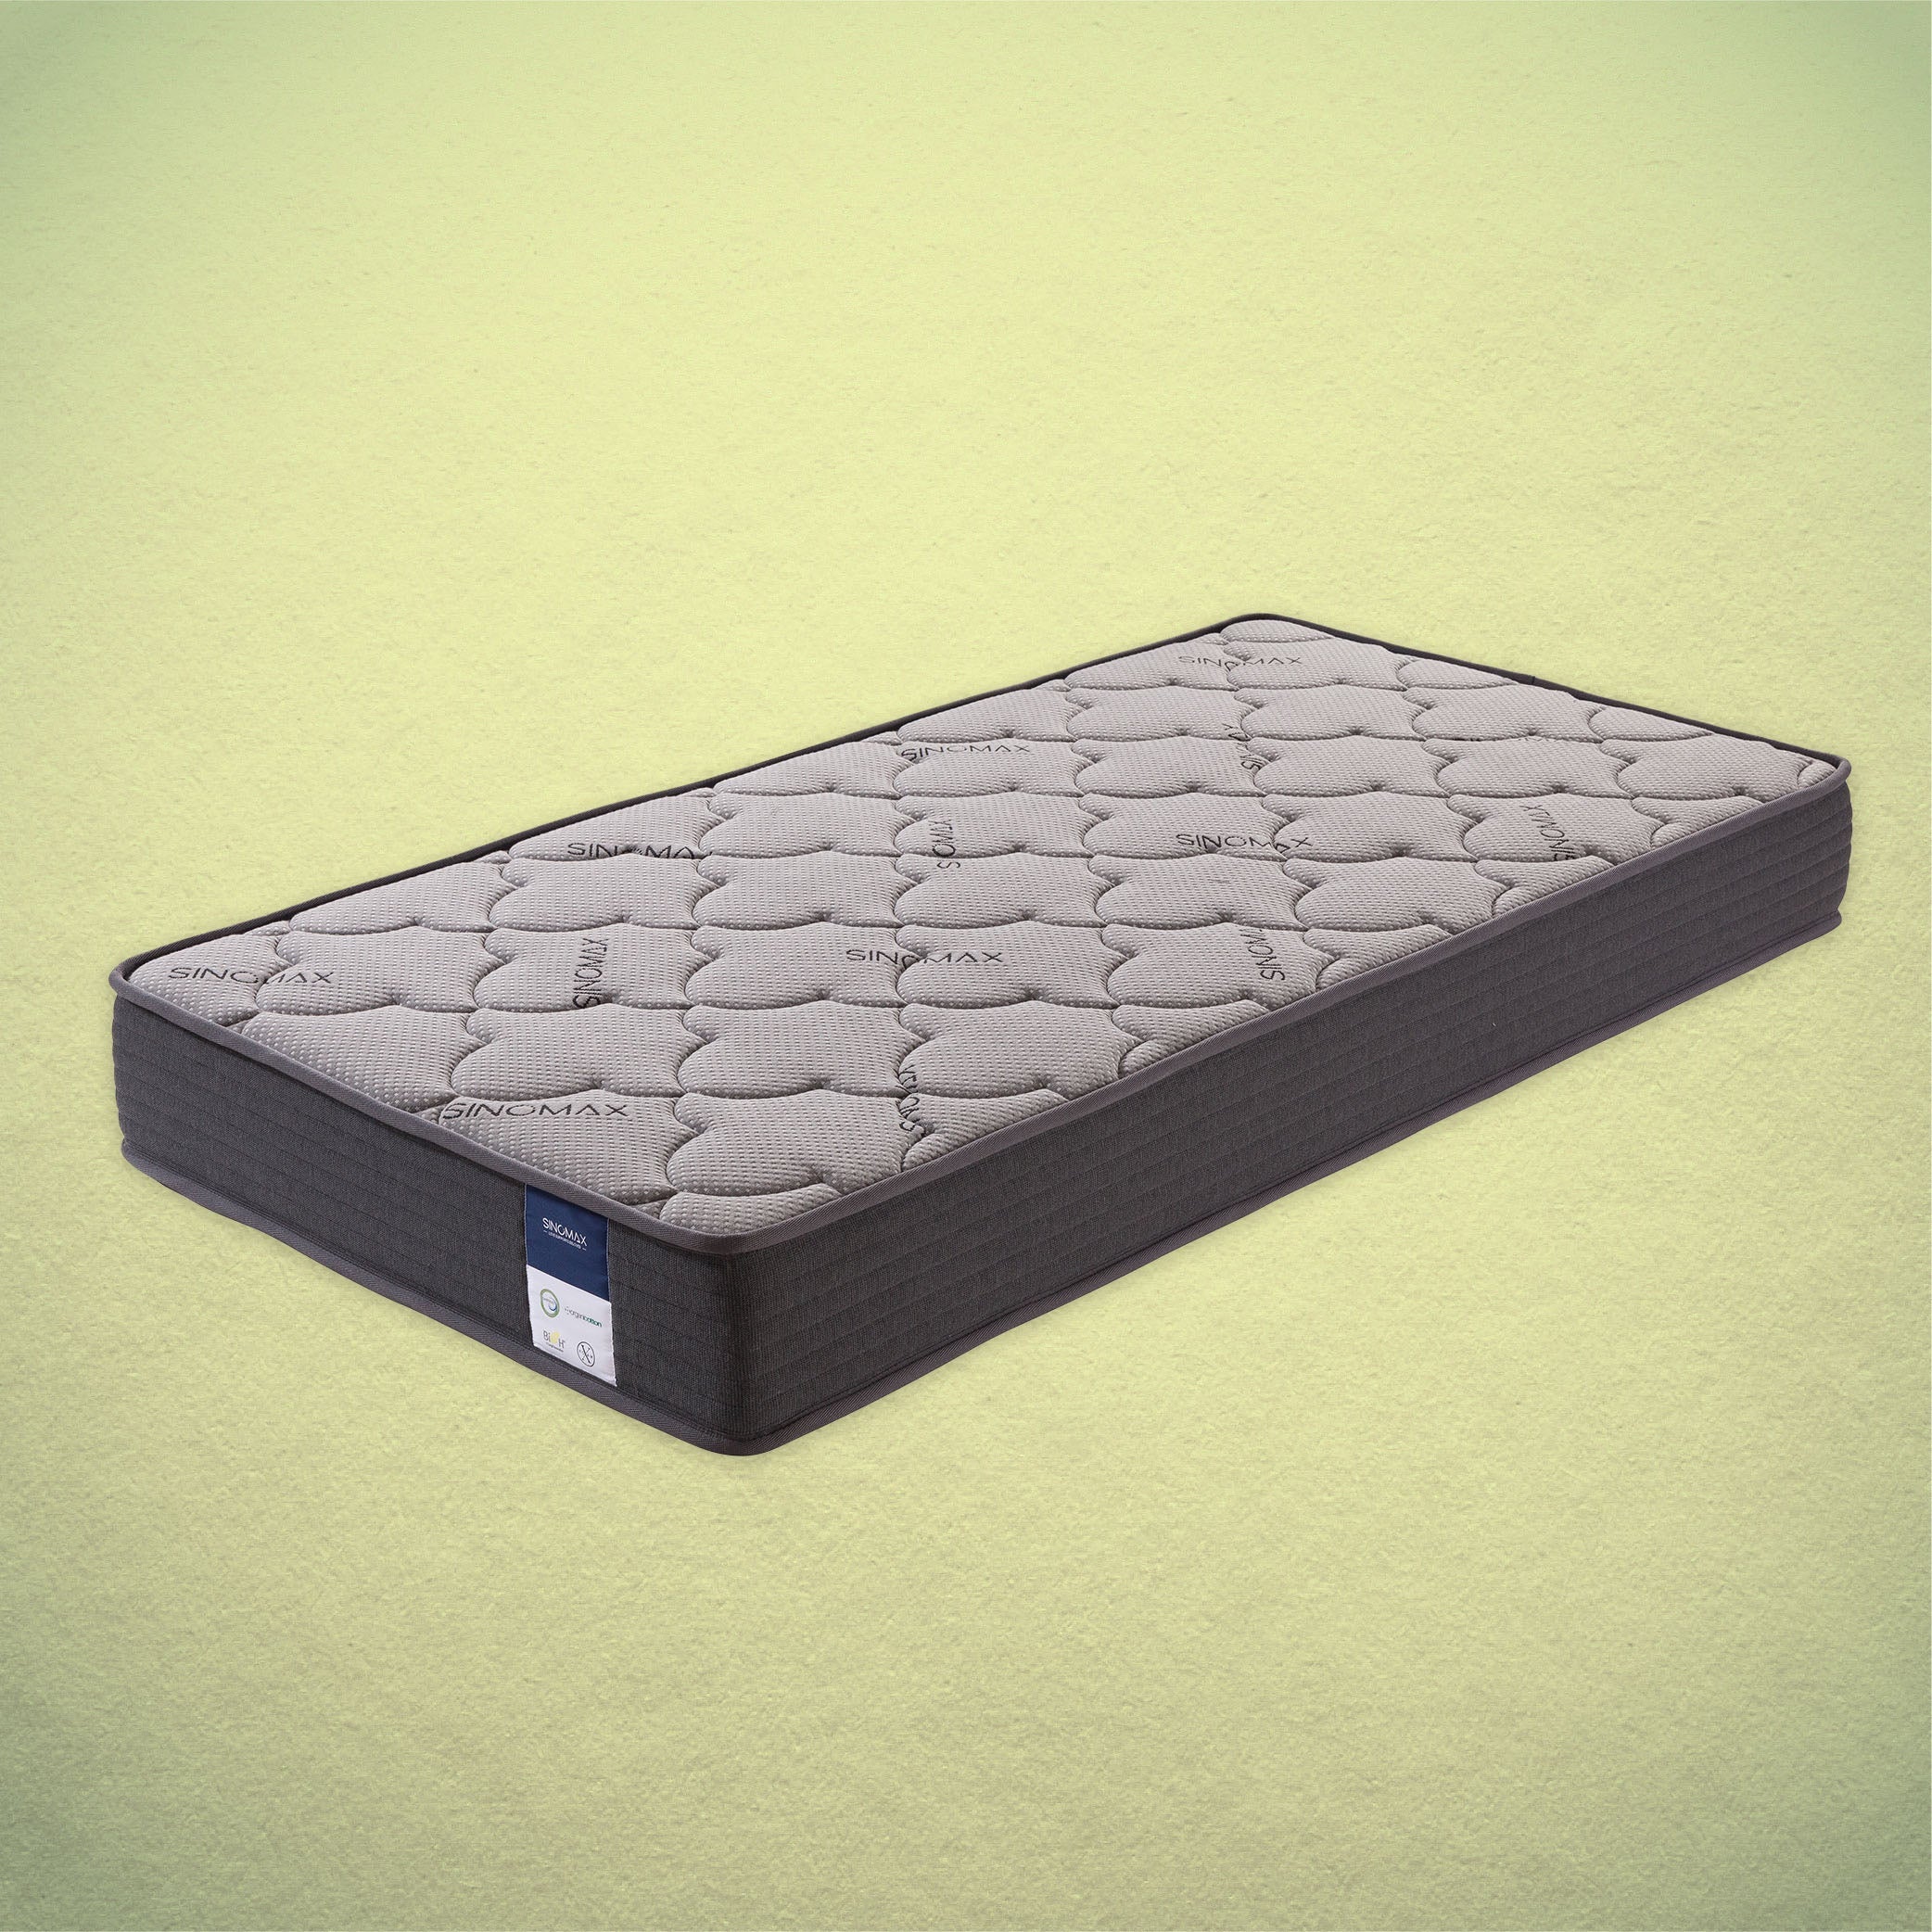 Anti-Bacterial Support Mattress - Tailor-made size (48" W or below)